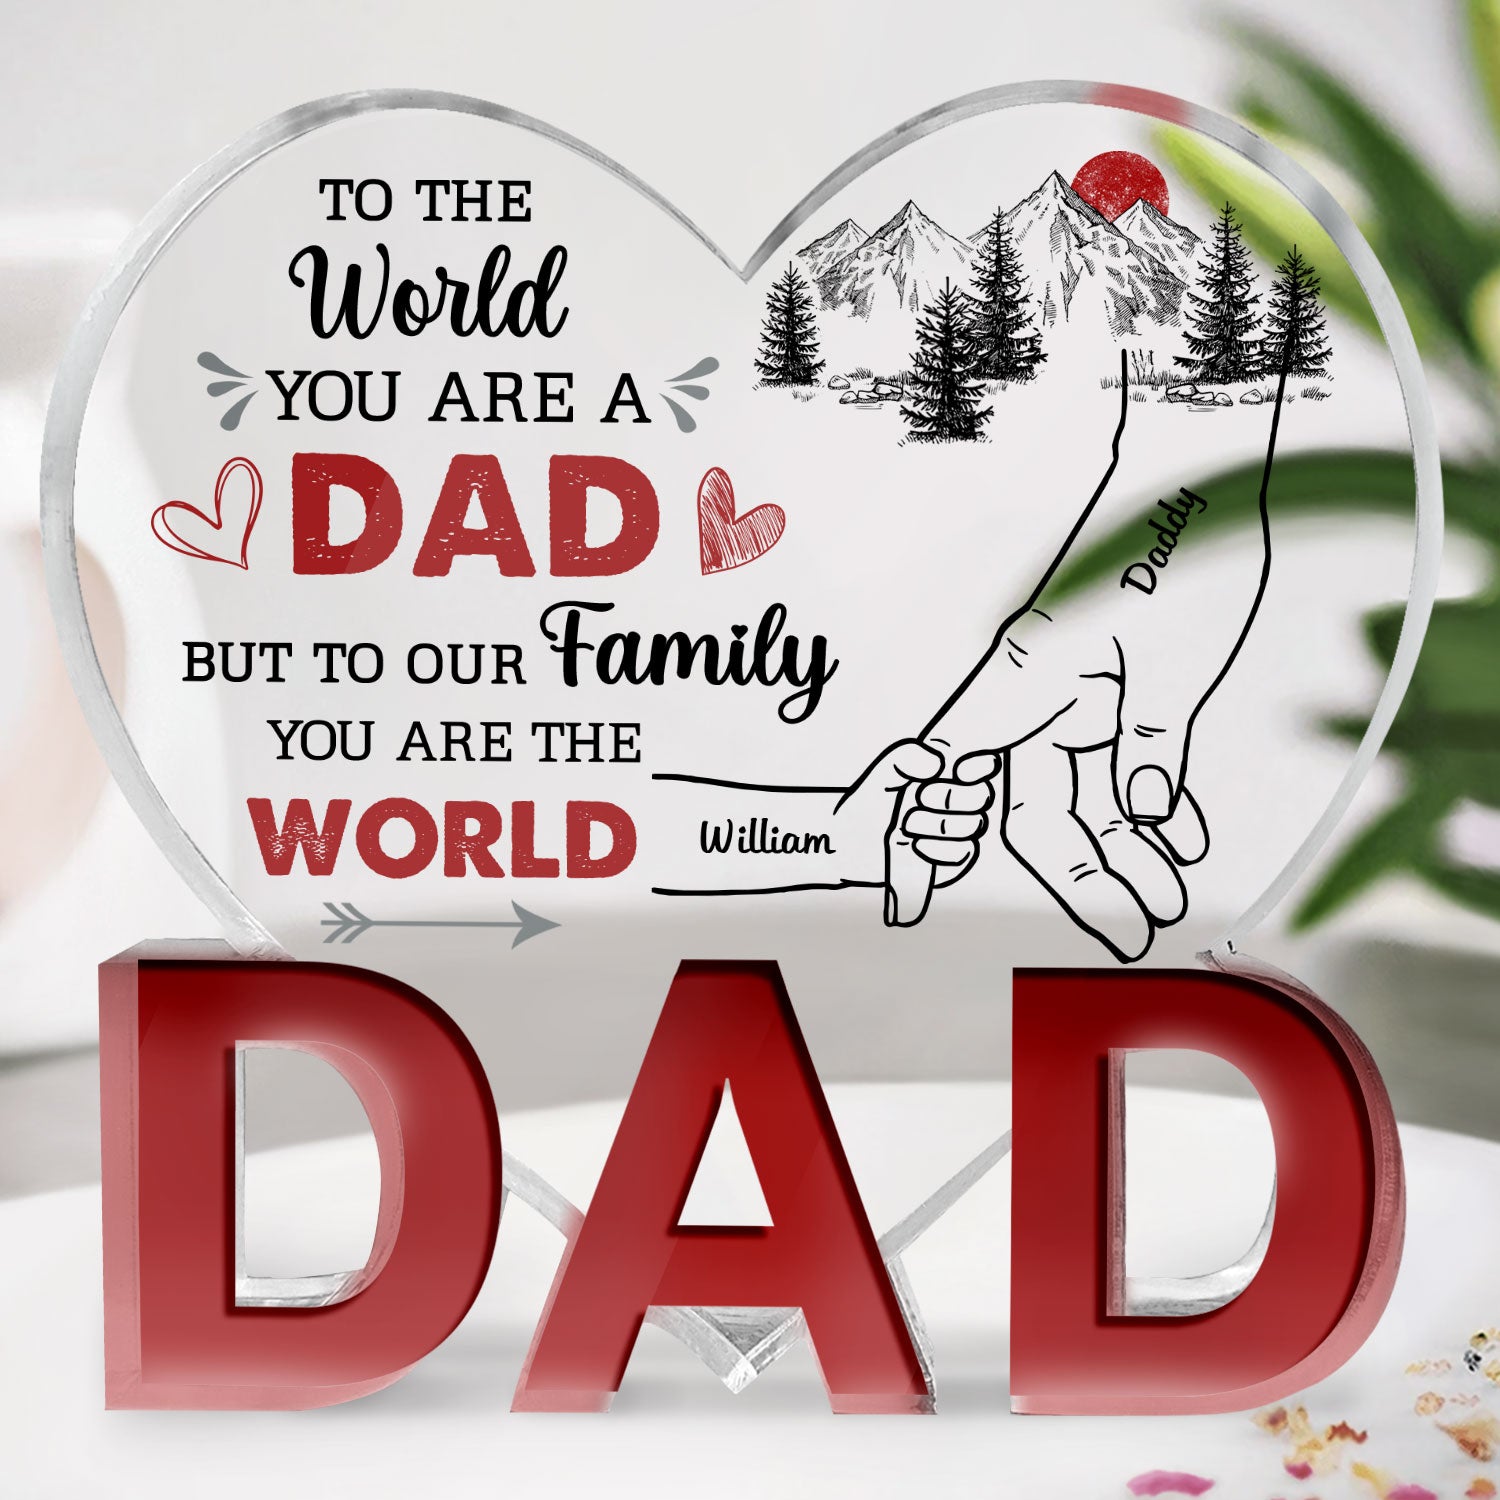 Dad You Are The World - Birthday, Loving Gift For Father - Personalized Love-Dad-Shaped Acrylic Plaque